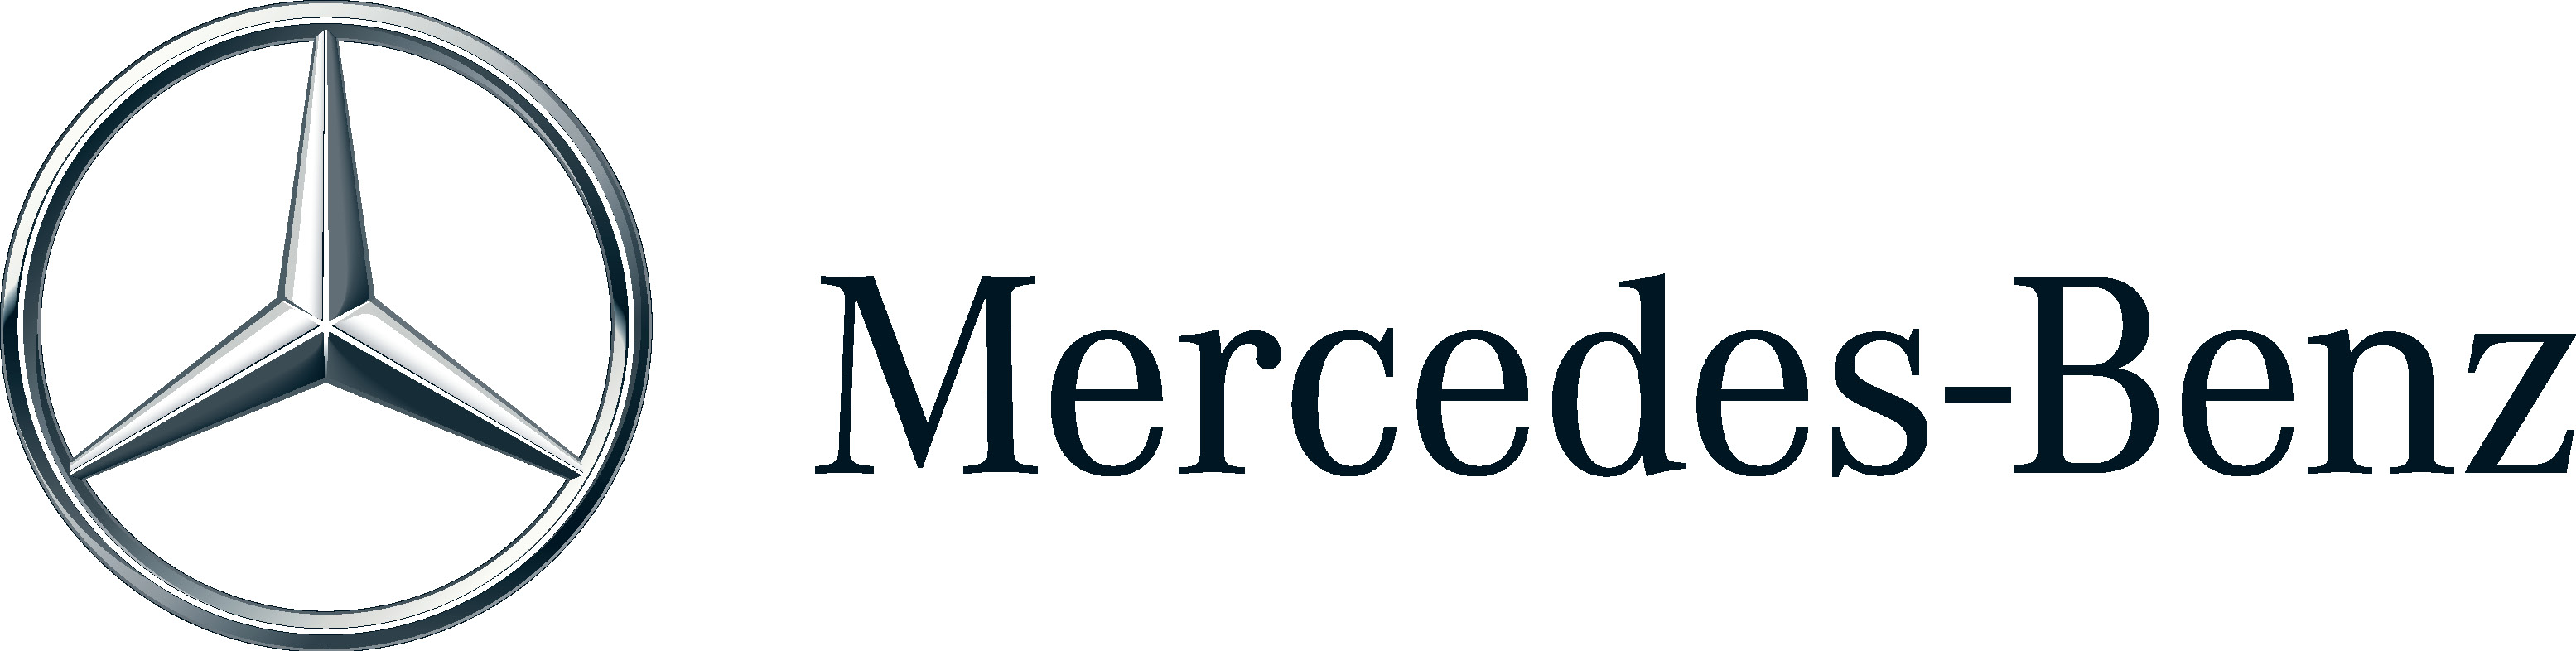 Mercedes Benz Logo Logospike Famous And Vector